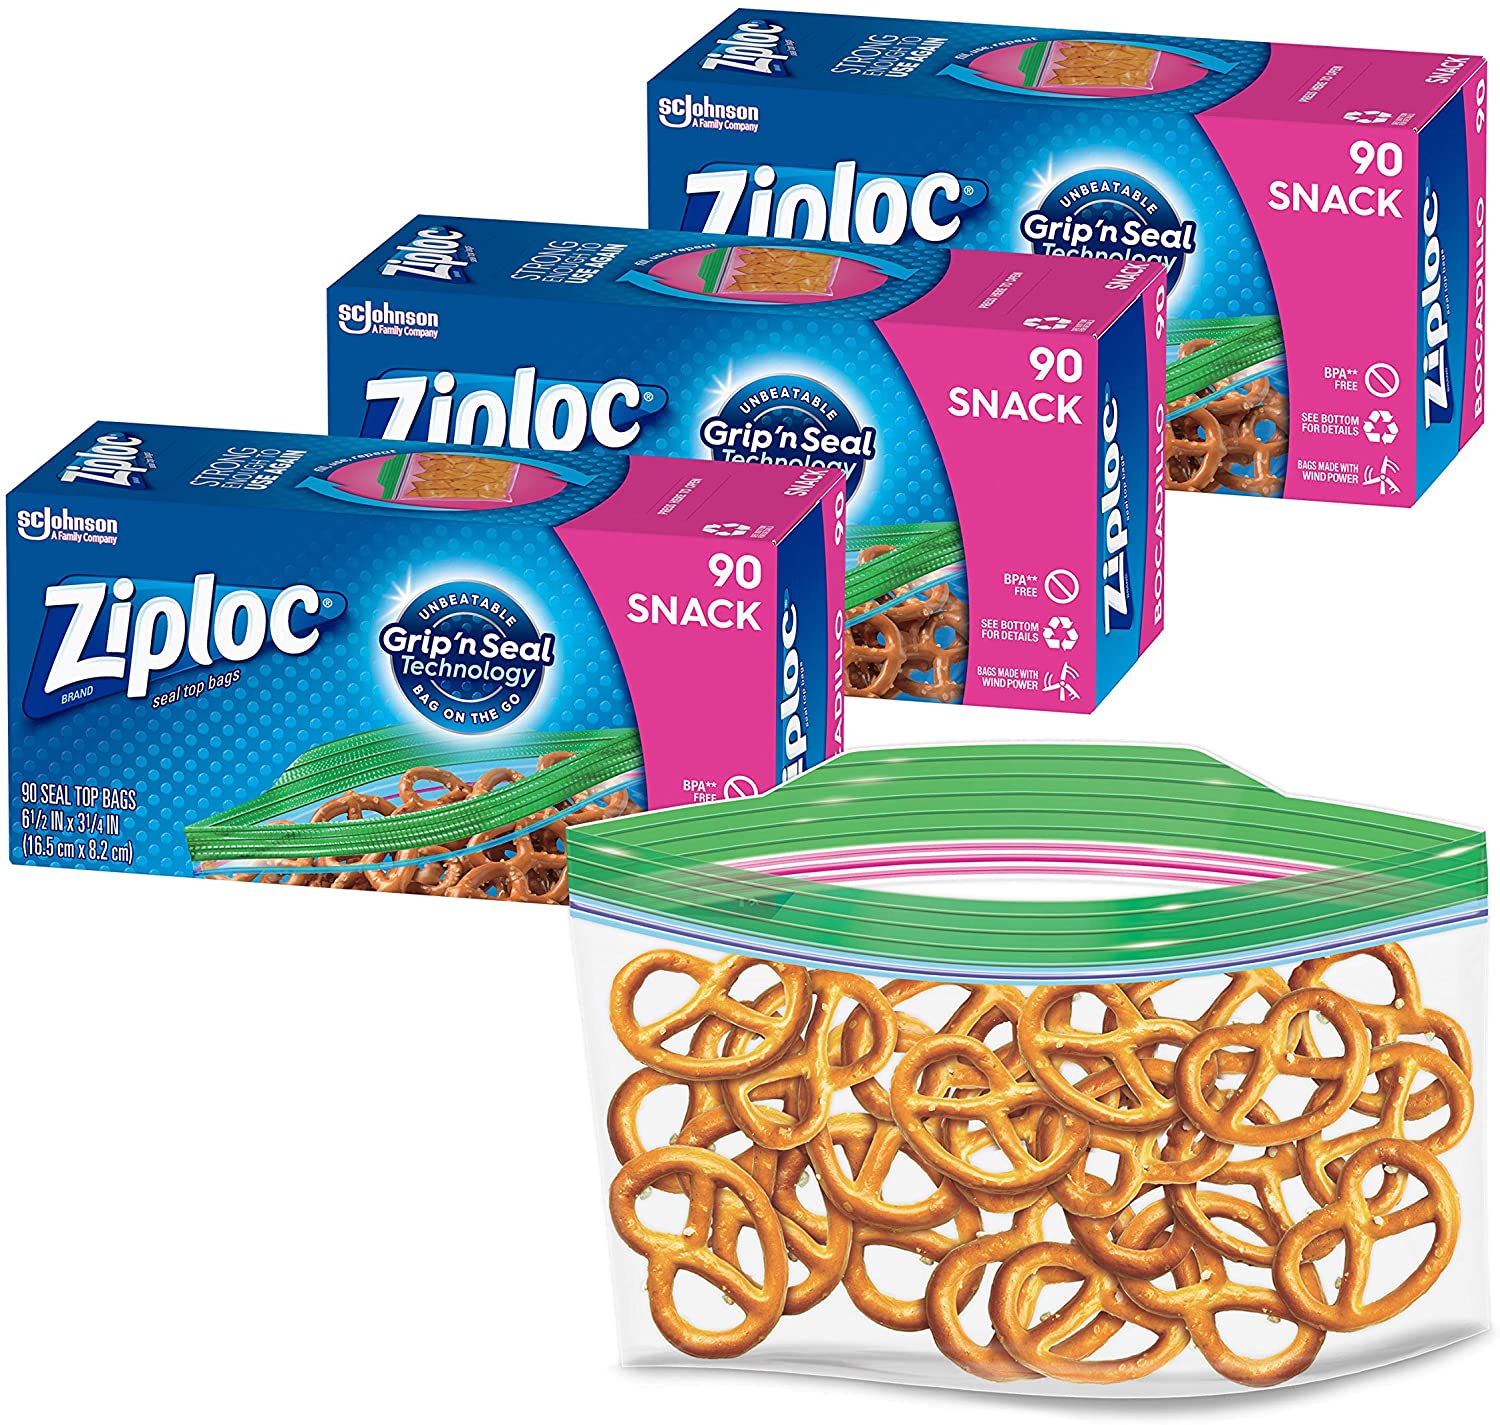 Ziploc Snack and Sandwich Bags 270ct $6.35 shipped